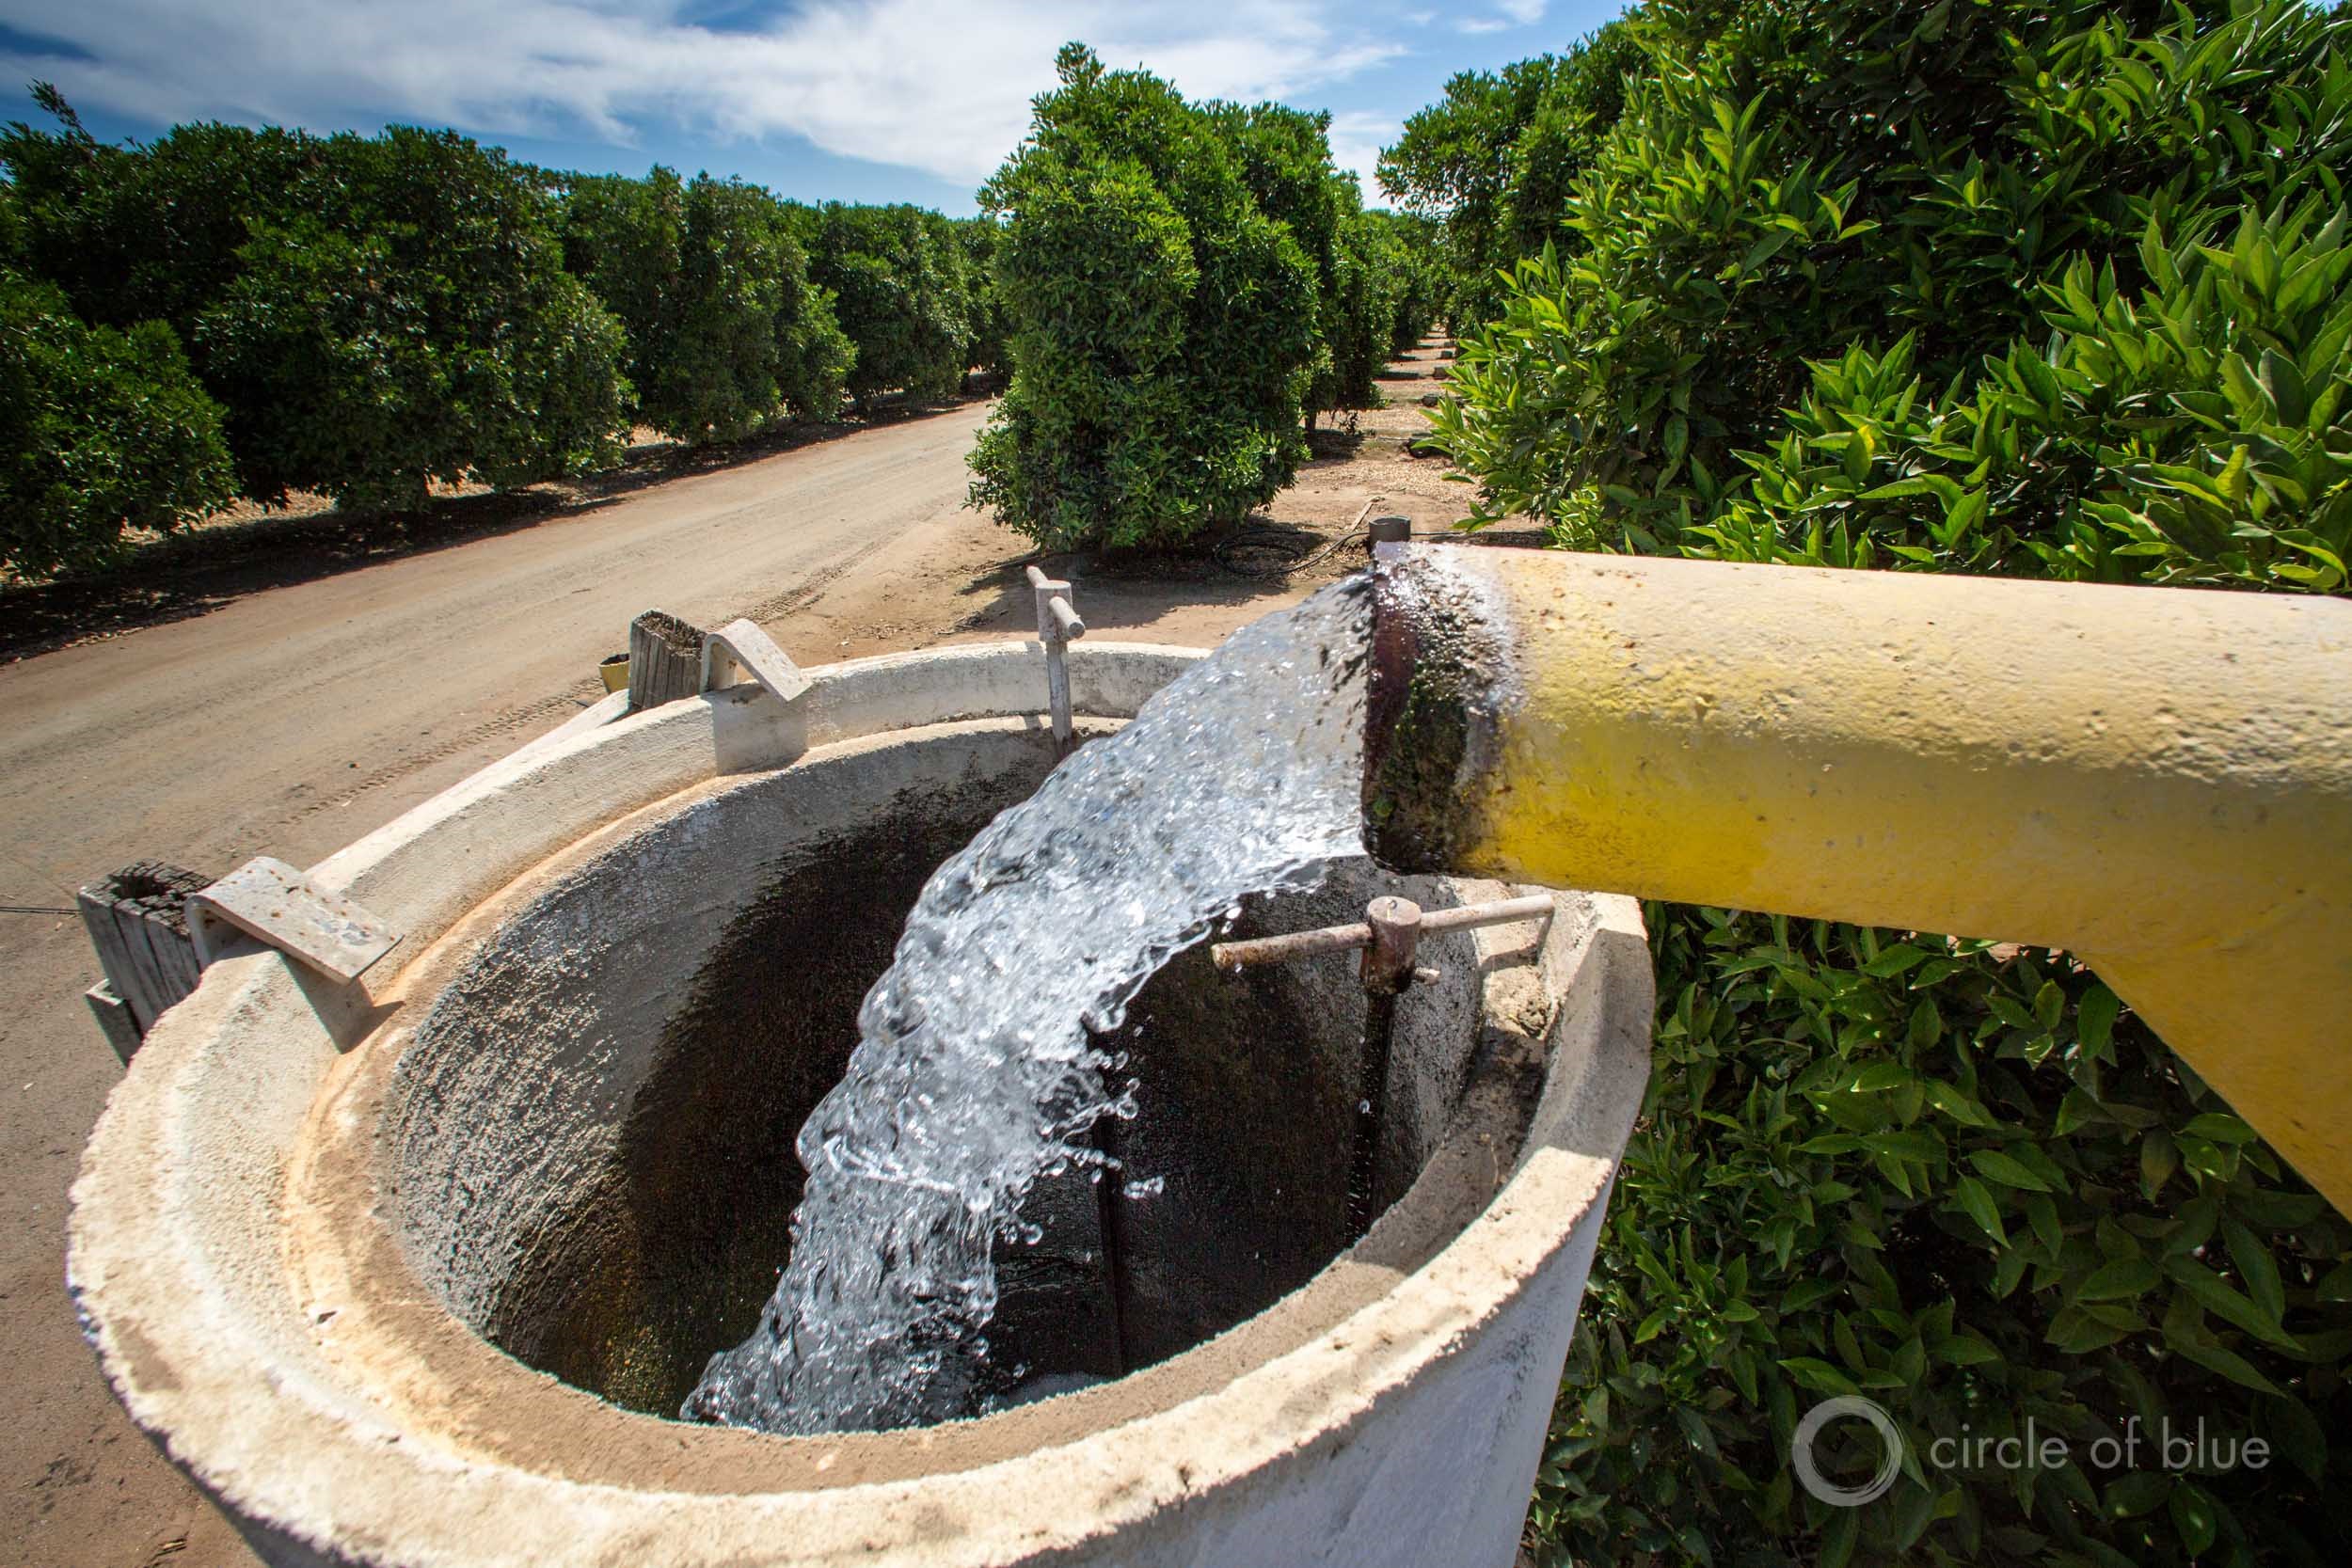 When reservoirs and rivers are low, farmers in California's San Joaquin Valley pump groundwater. When aquifer levels drop to record lows, it decreases natural water-storage capacity. Photo © J. Carl Ganter / Circle of Blue